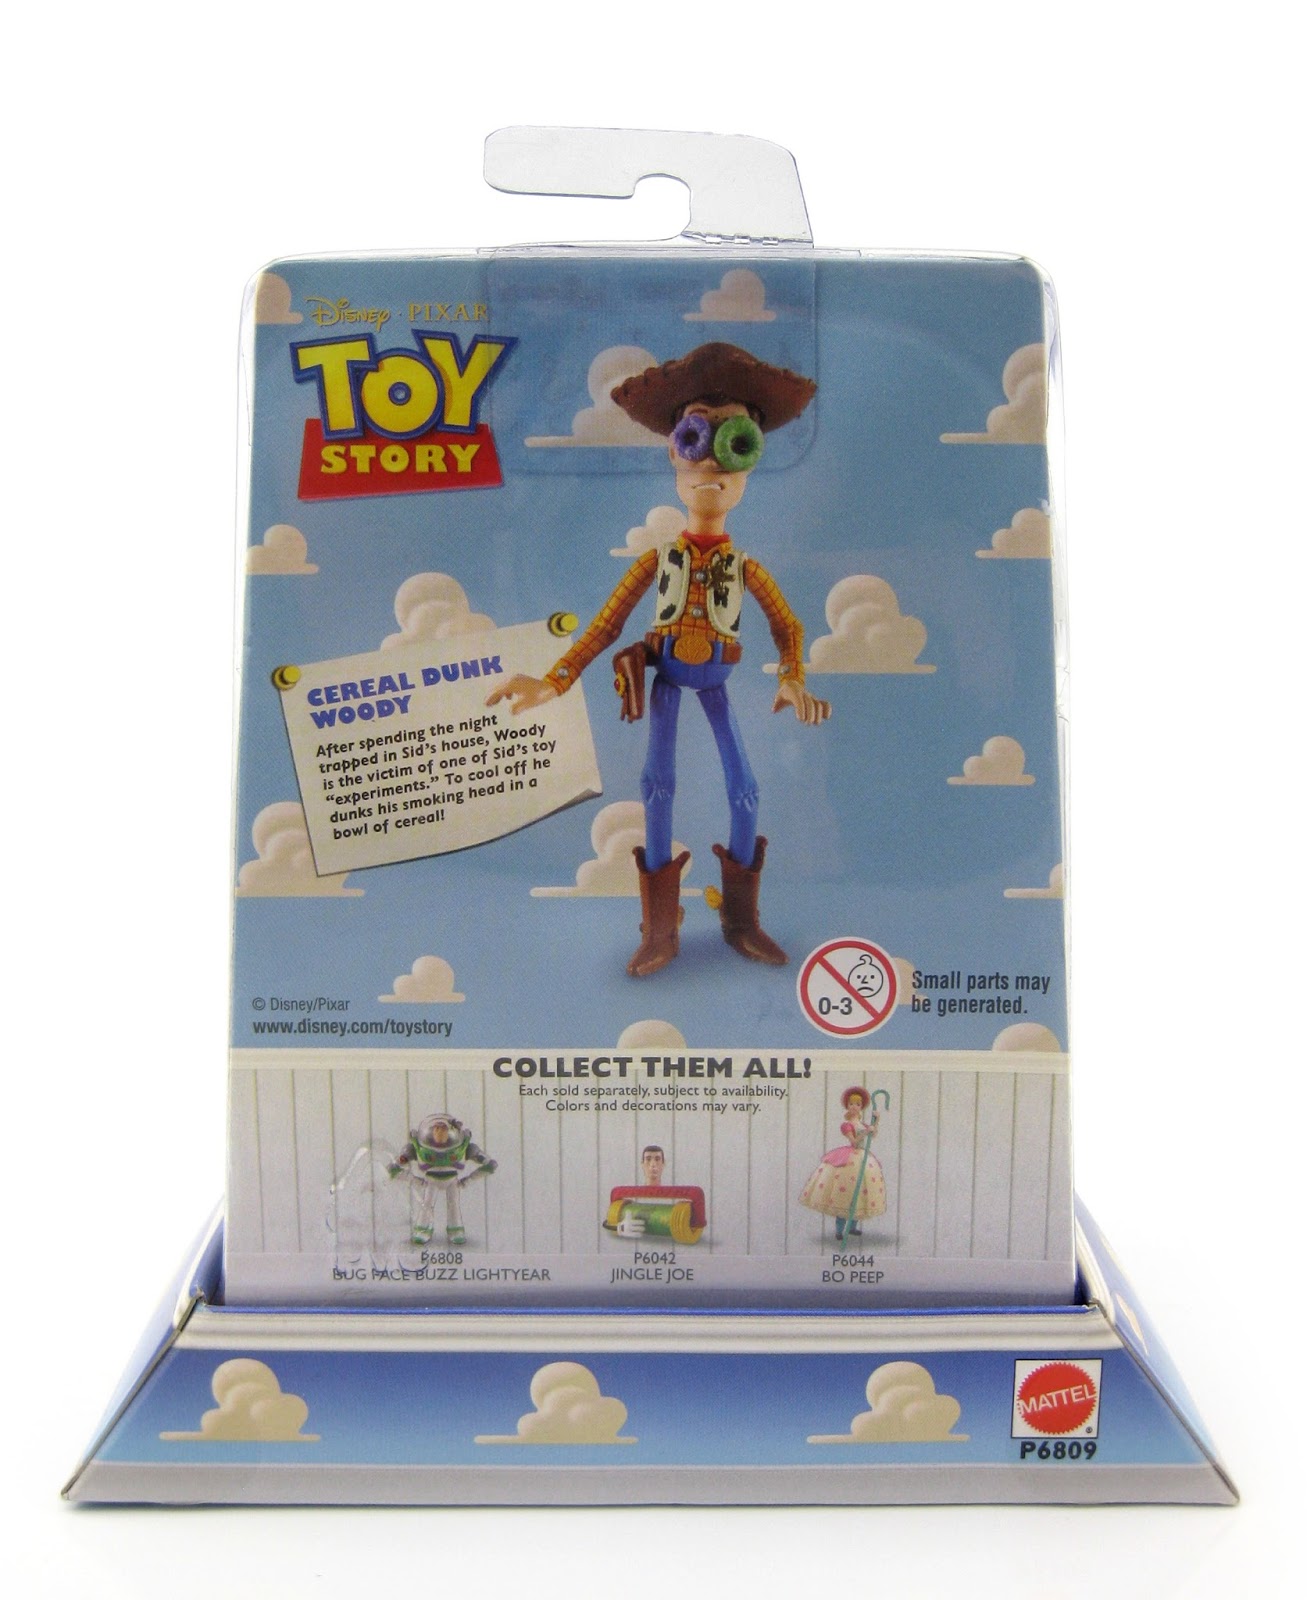 toy story sid action figure